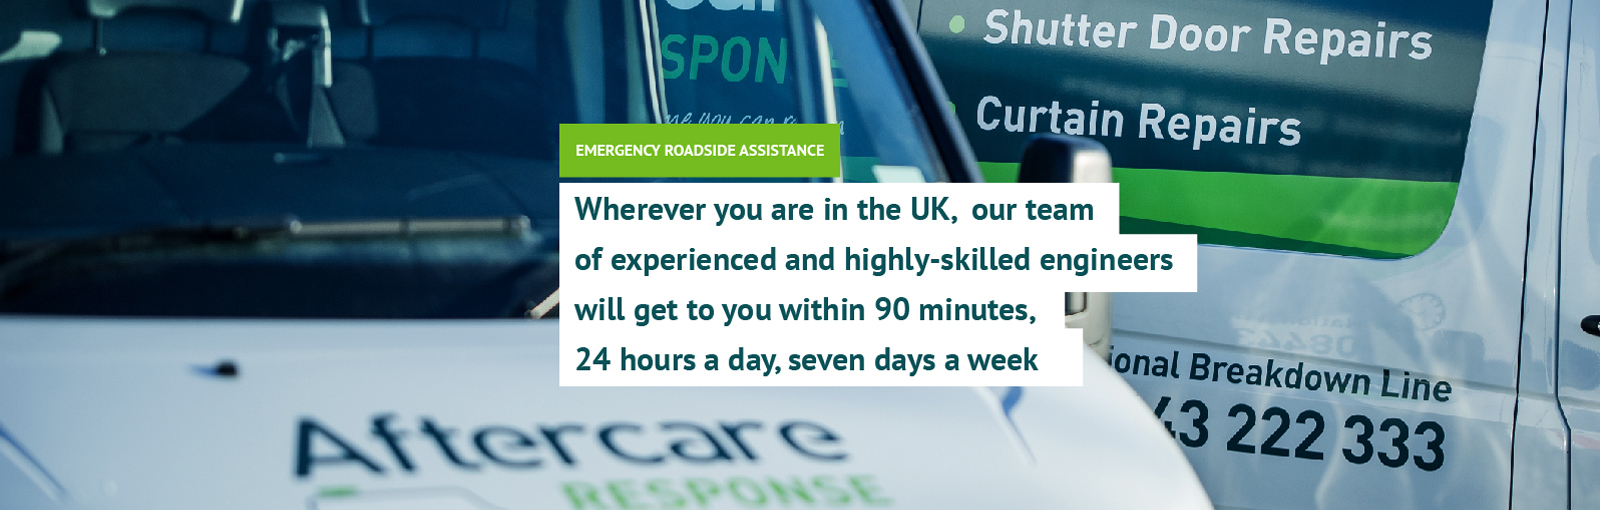 Wherever you are in the UK,  our team of experienced and highly-skilled engineers will get to you within 90 minutes, 24 hours a day, seven days a week